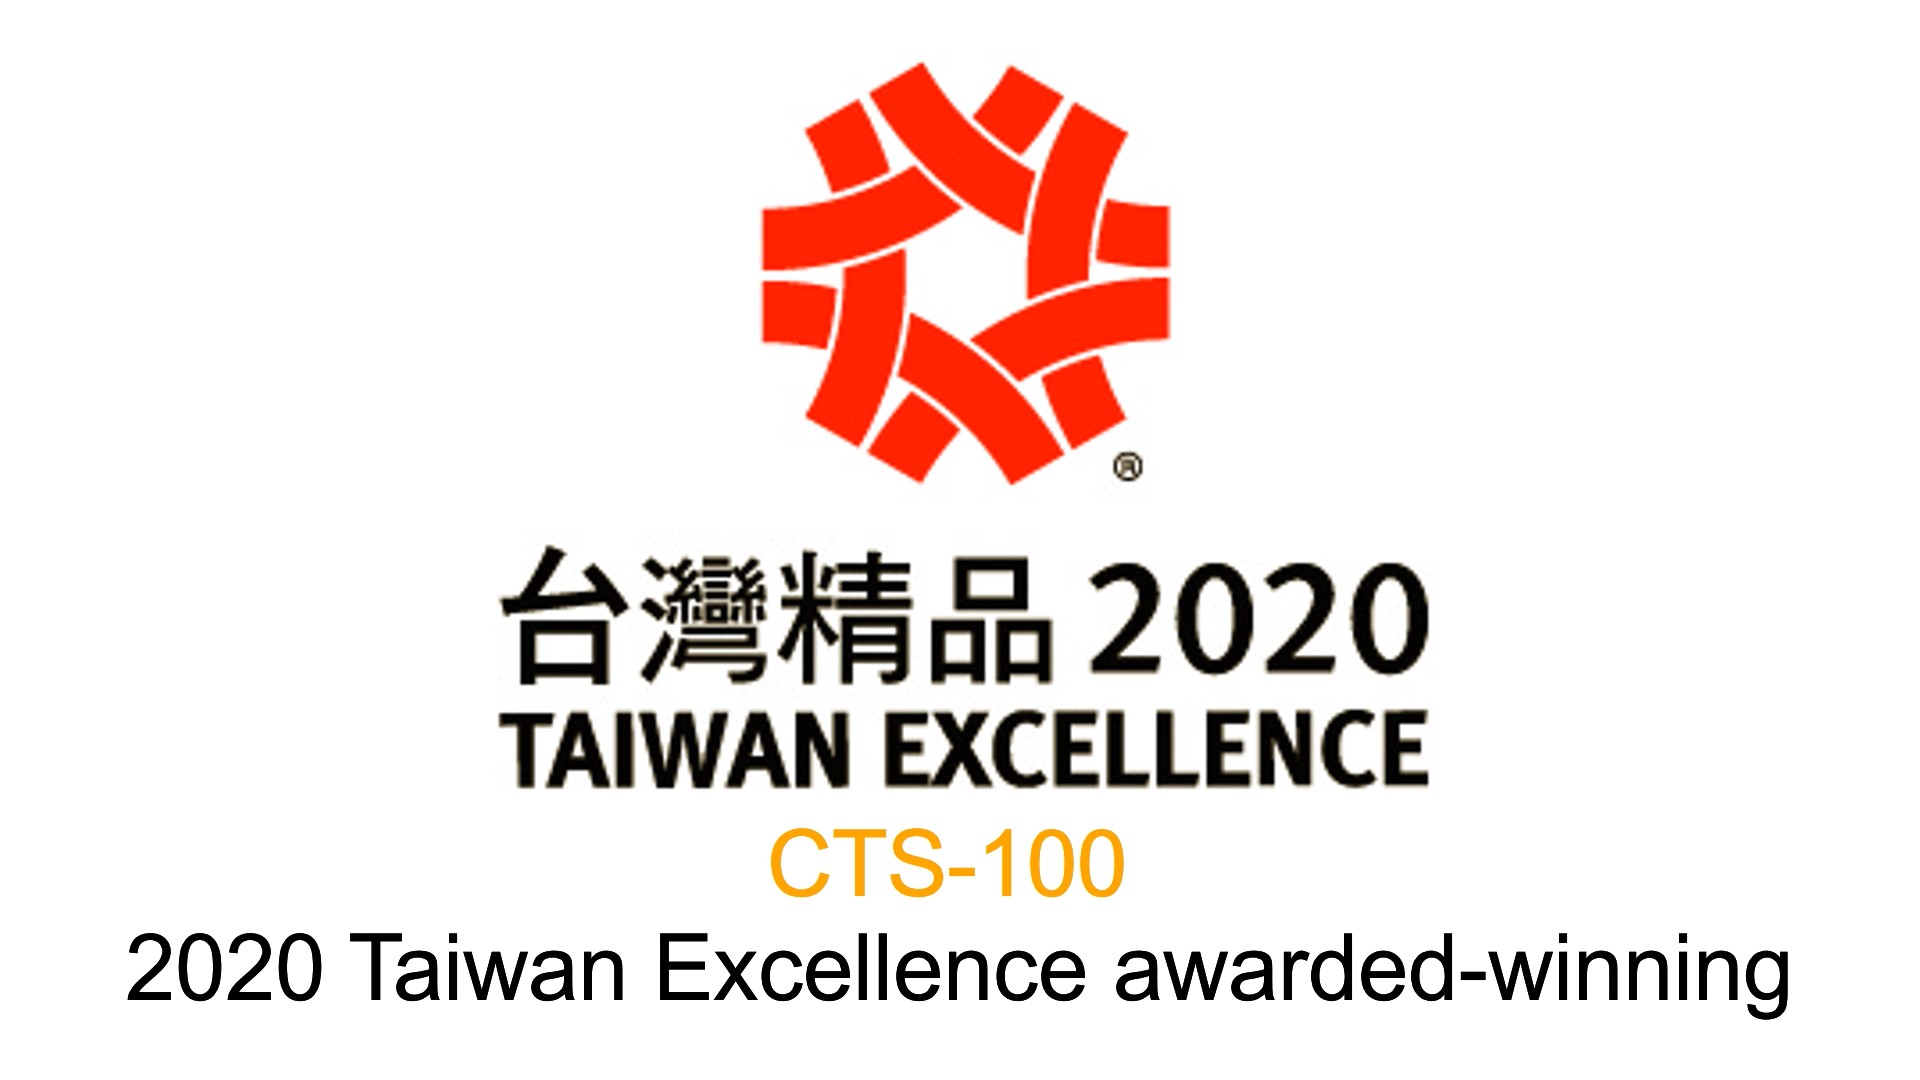 Video|CTS-100 Awarded 2020 Taiwan Exellence